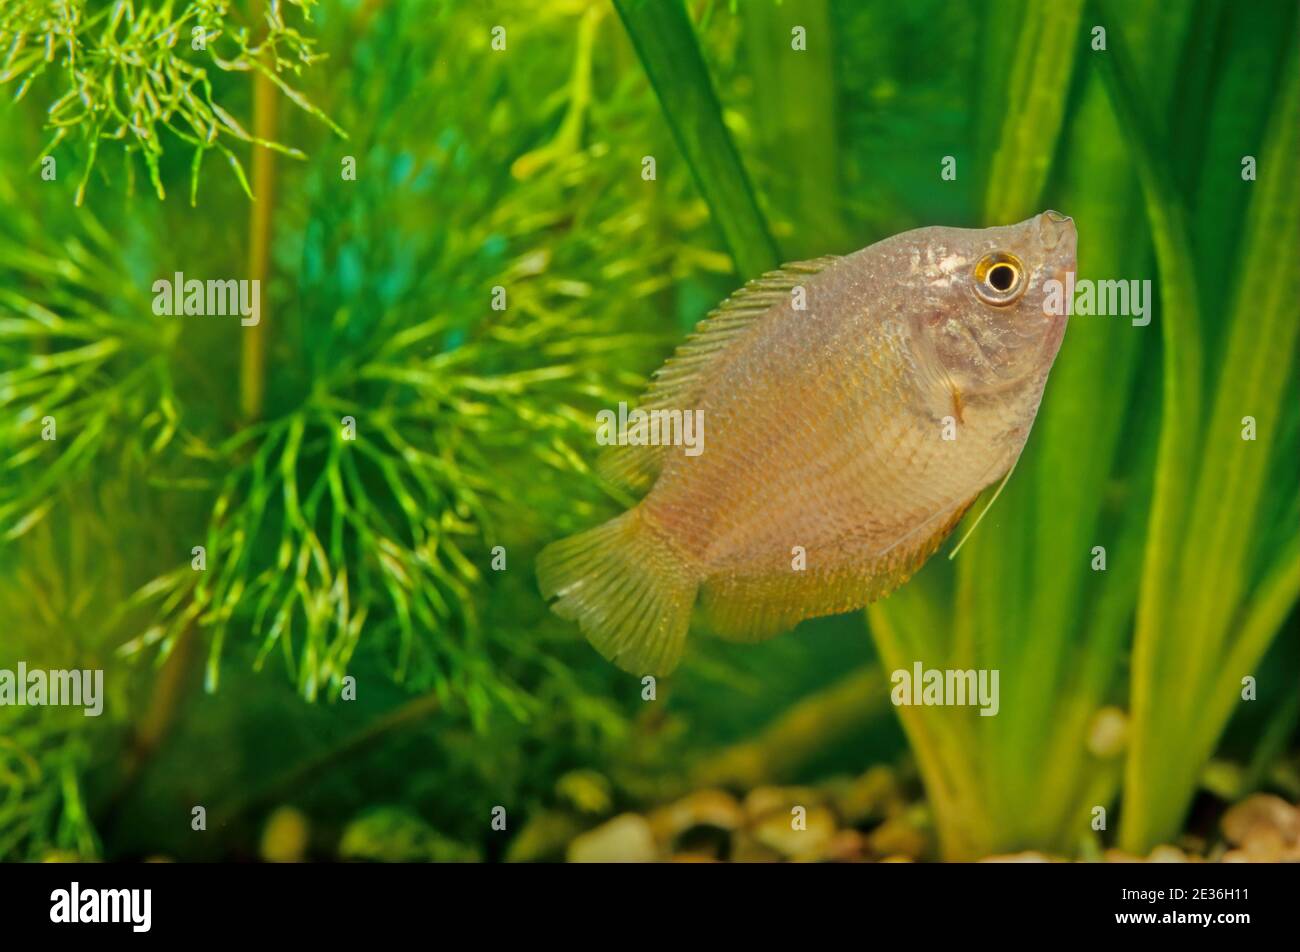 The dwarf gourami (Trichogaster lalius) is a species of gourami native to South Asia. Stock Photo